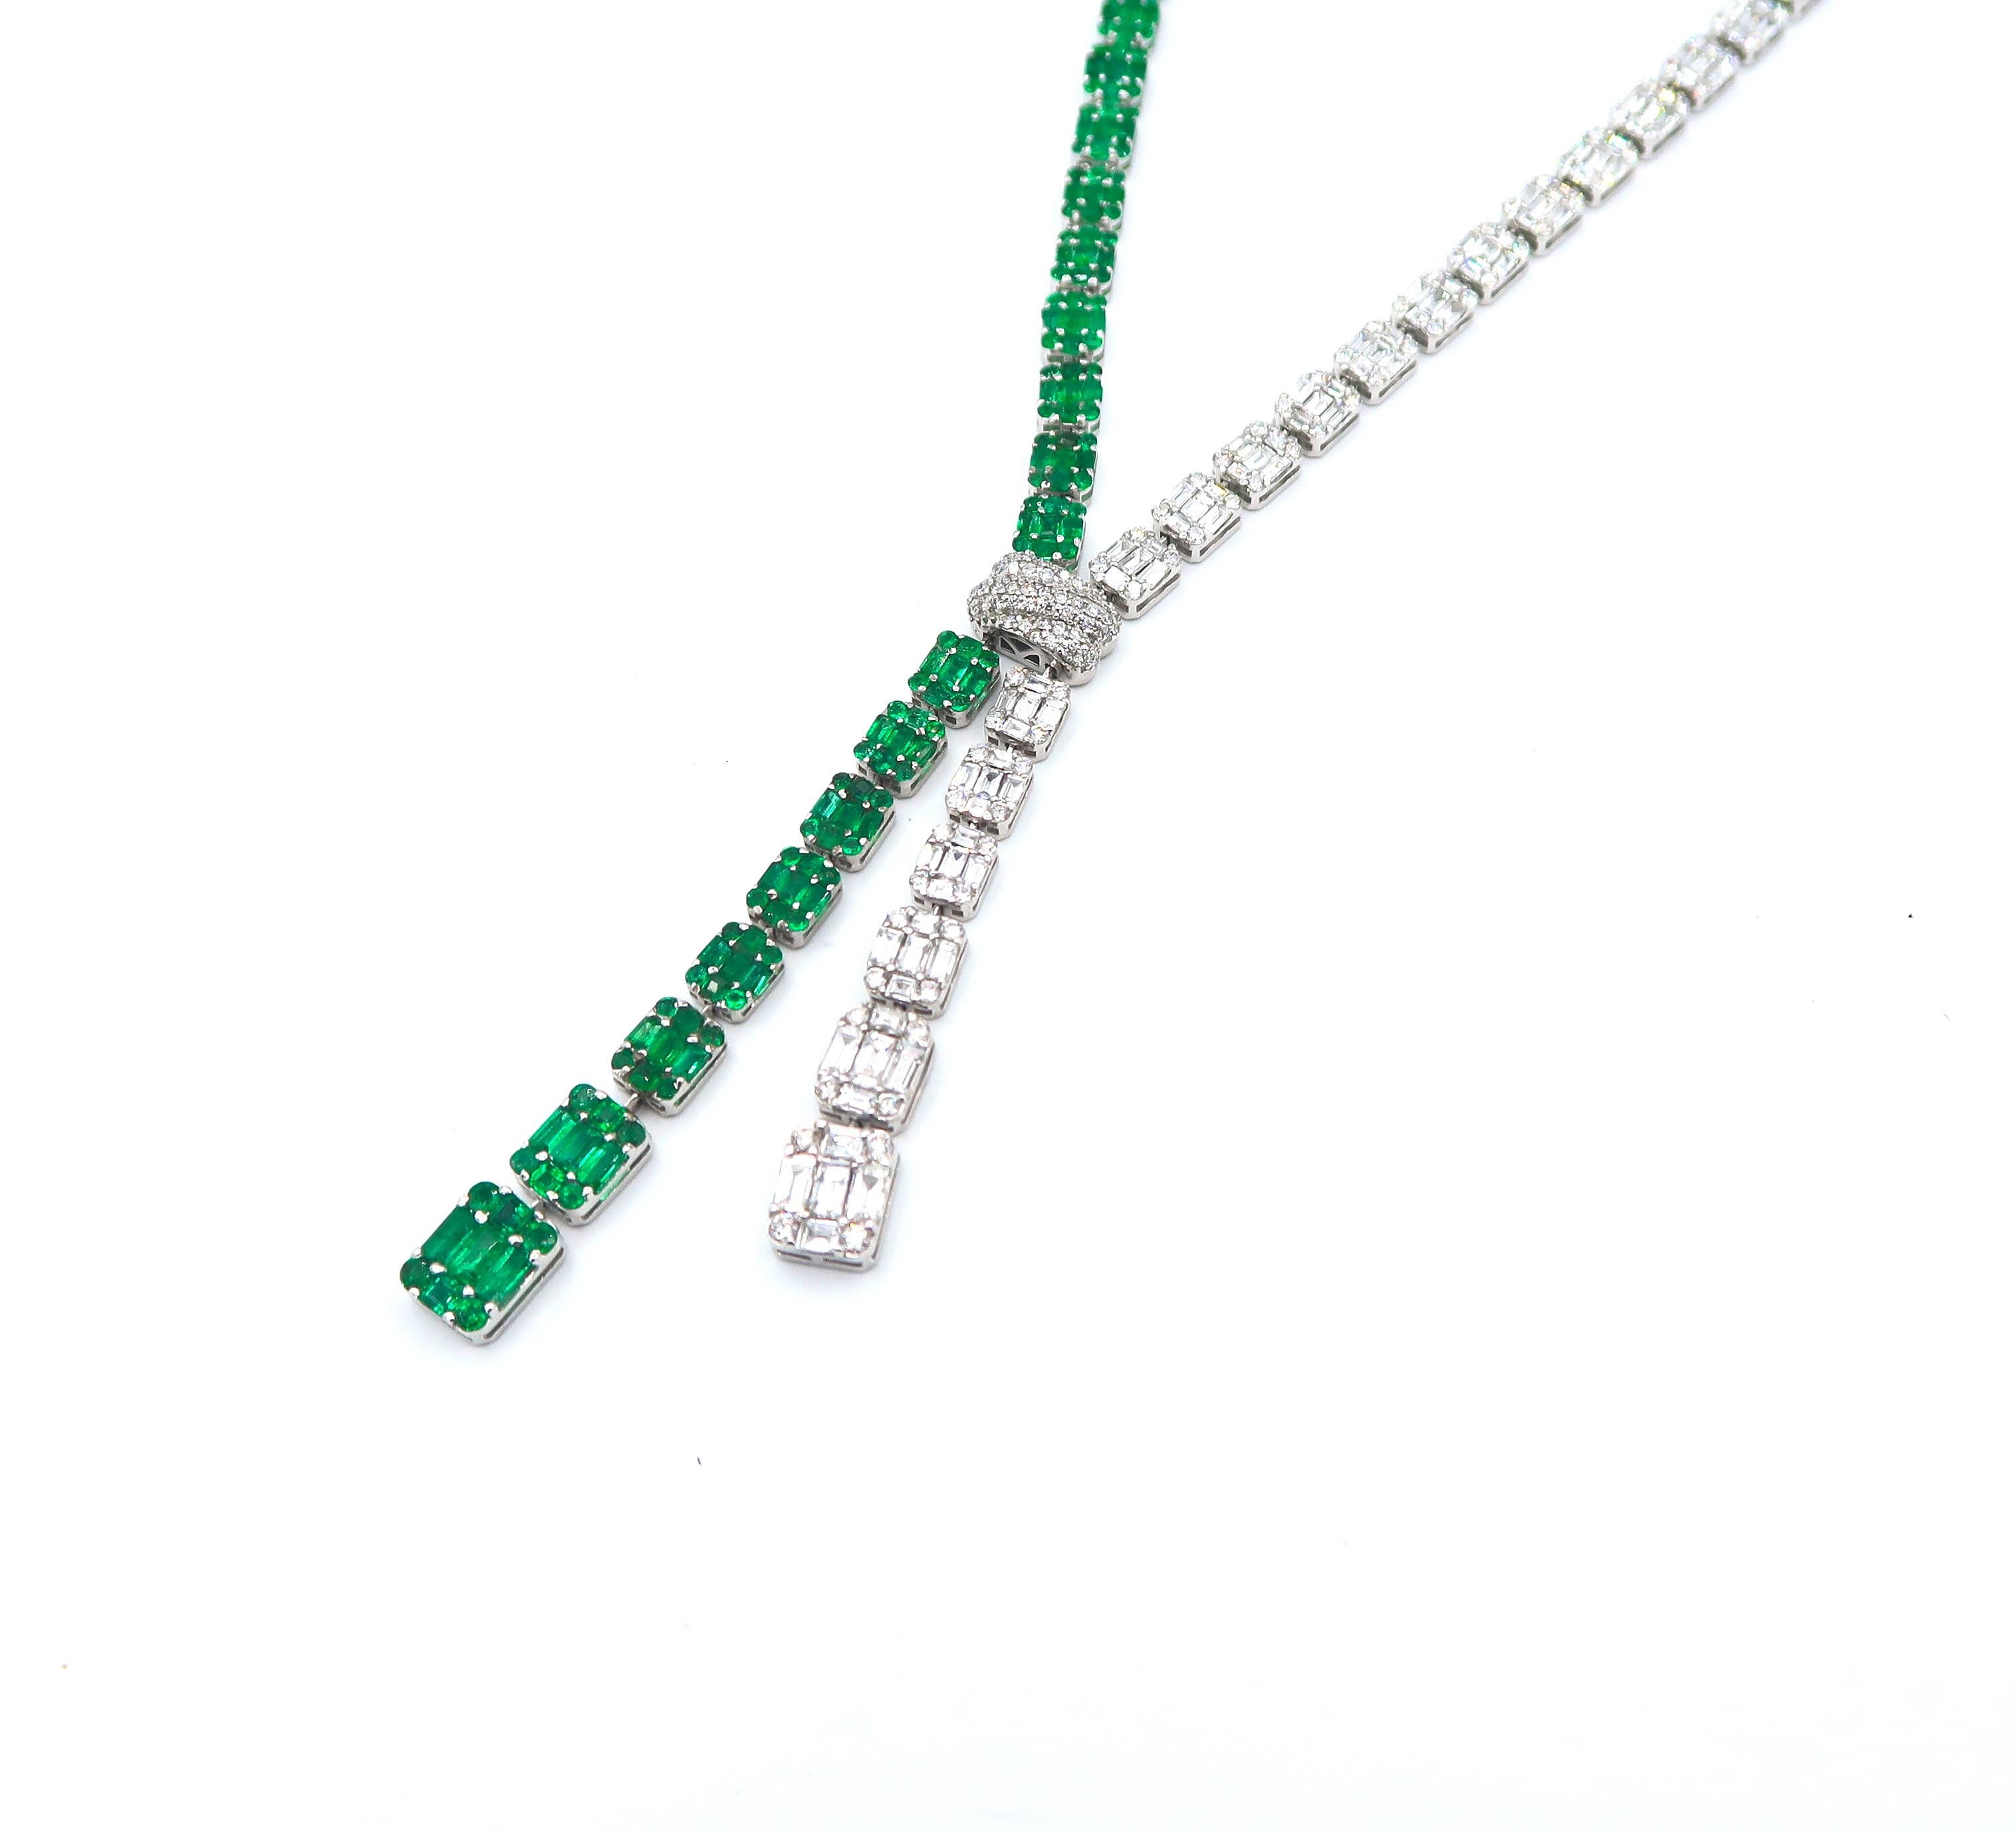 Contemporary Illusion-Set Diamond and Emerald Lariat Y-Necklace in 18 Karat White Gold